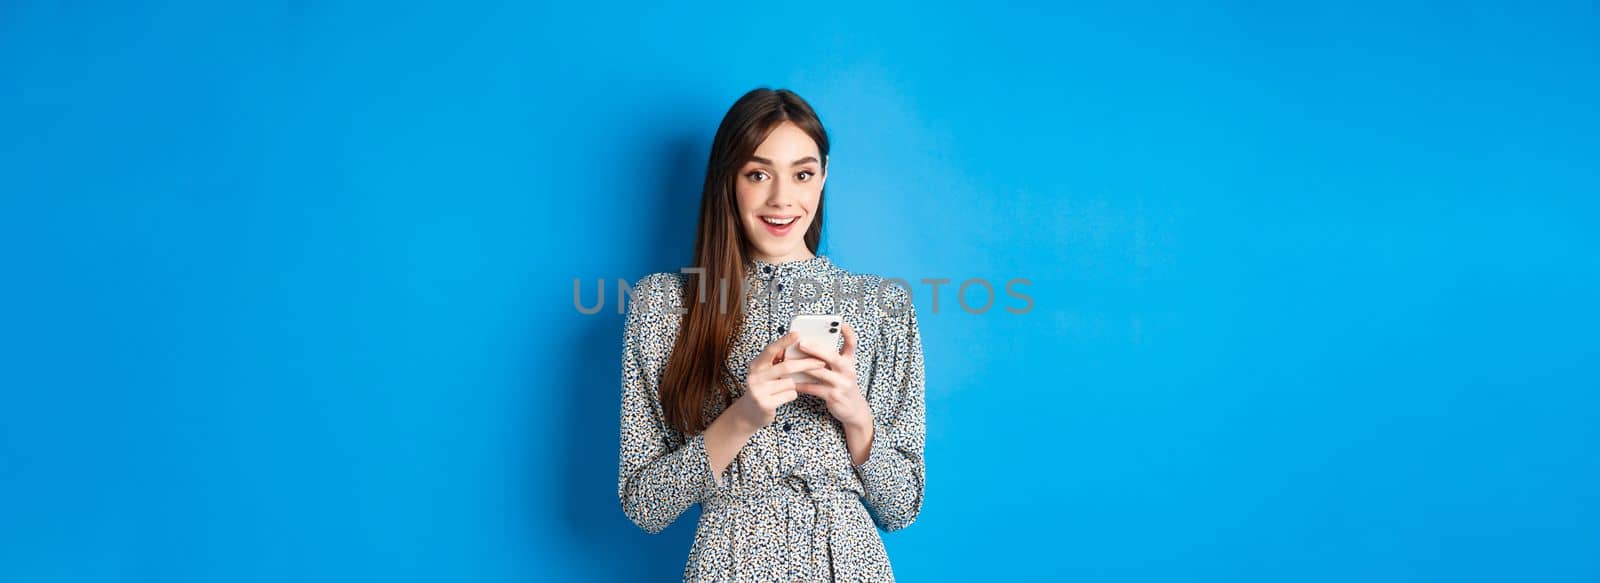 Cute smiling girl with long natural hair, wearing dress, using smartphone and looking happy, standing against blue background by Benzoix